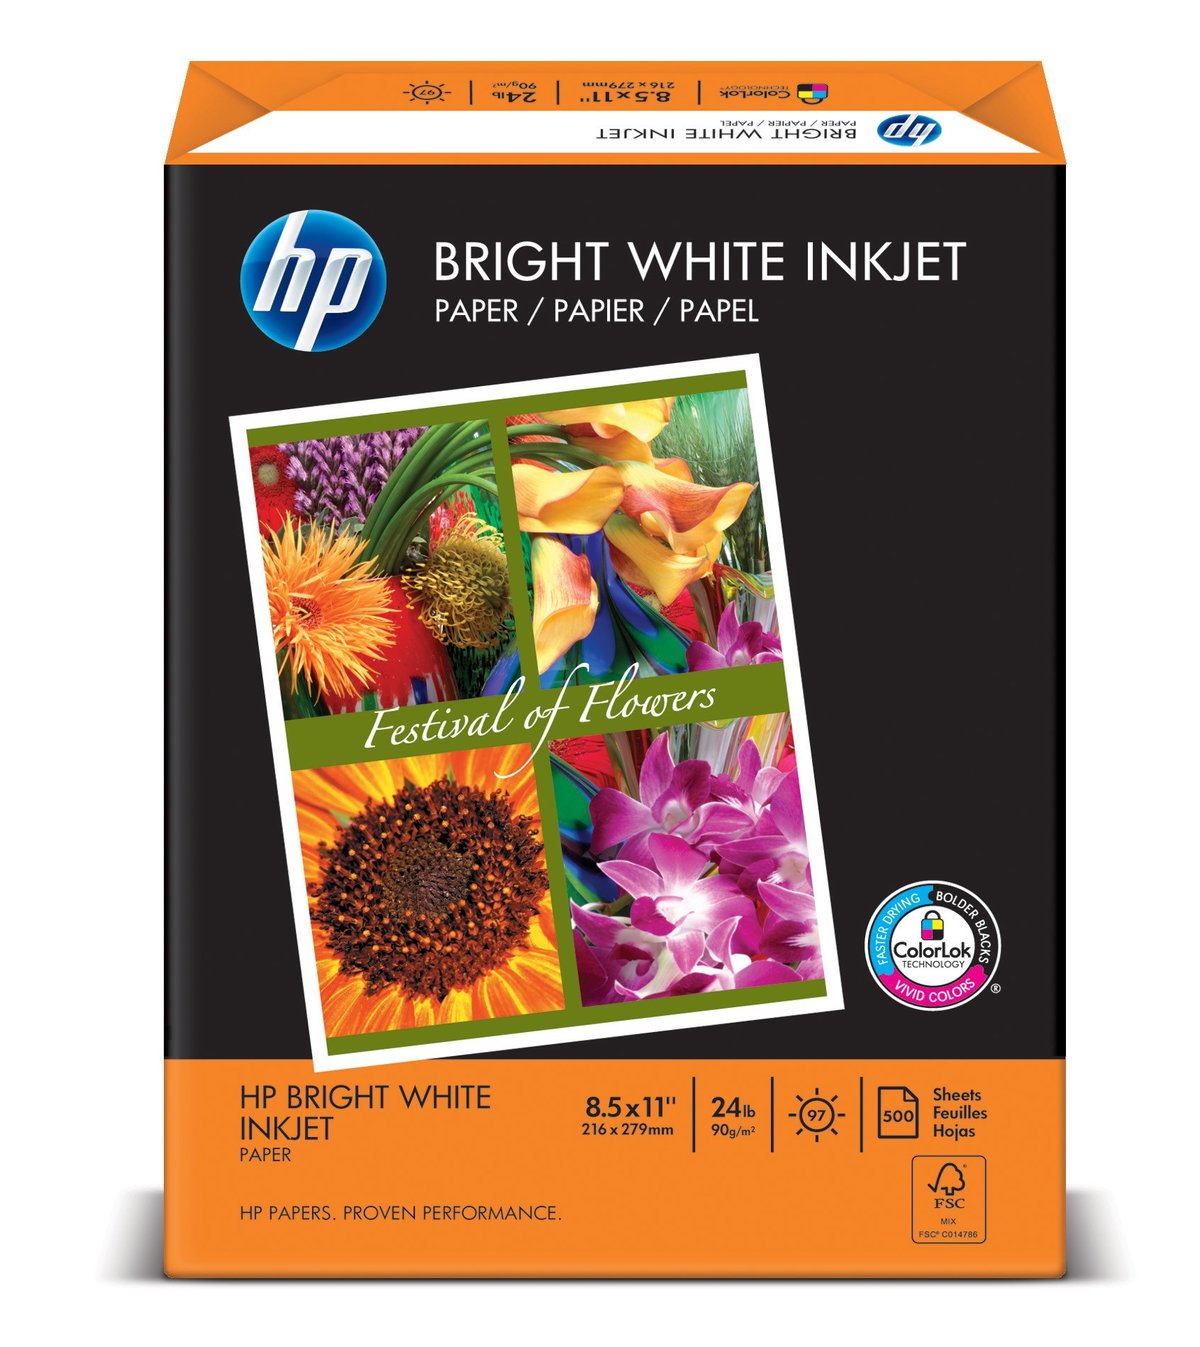 HP Printer Paper BrightWhite 24lb, 8.5x 11, 1 Ream, 500 Sheets, Made in USA  From Forest Stewardship Council (FSC) Certified Resources, 100 Bright, Acid  Free, Engineered for HP Compatibility, 203000R